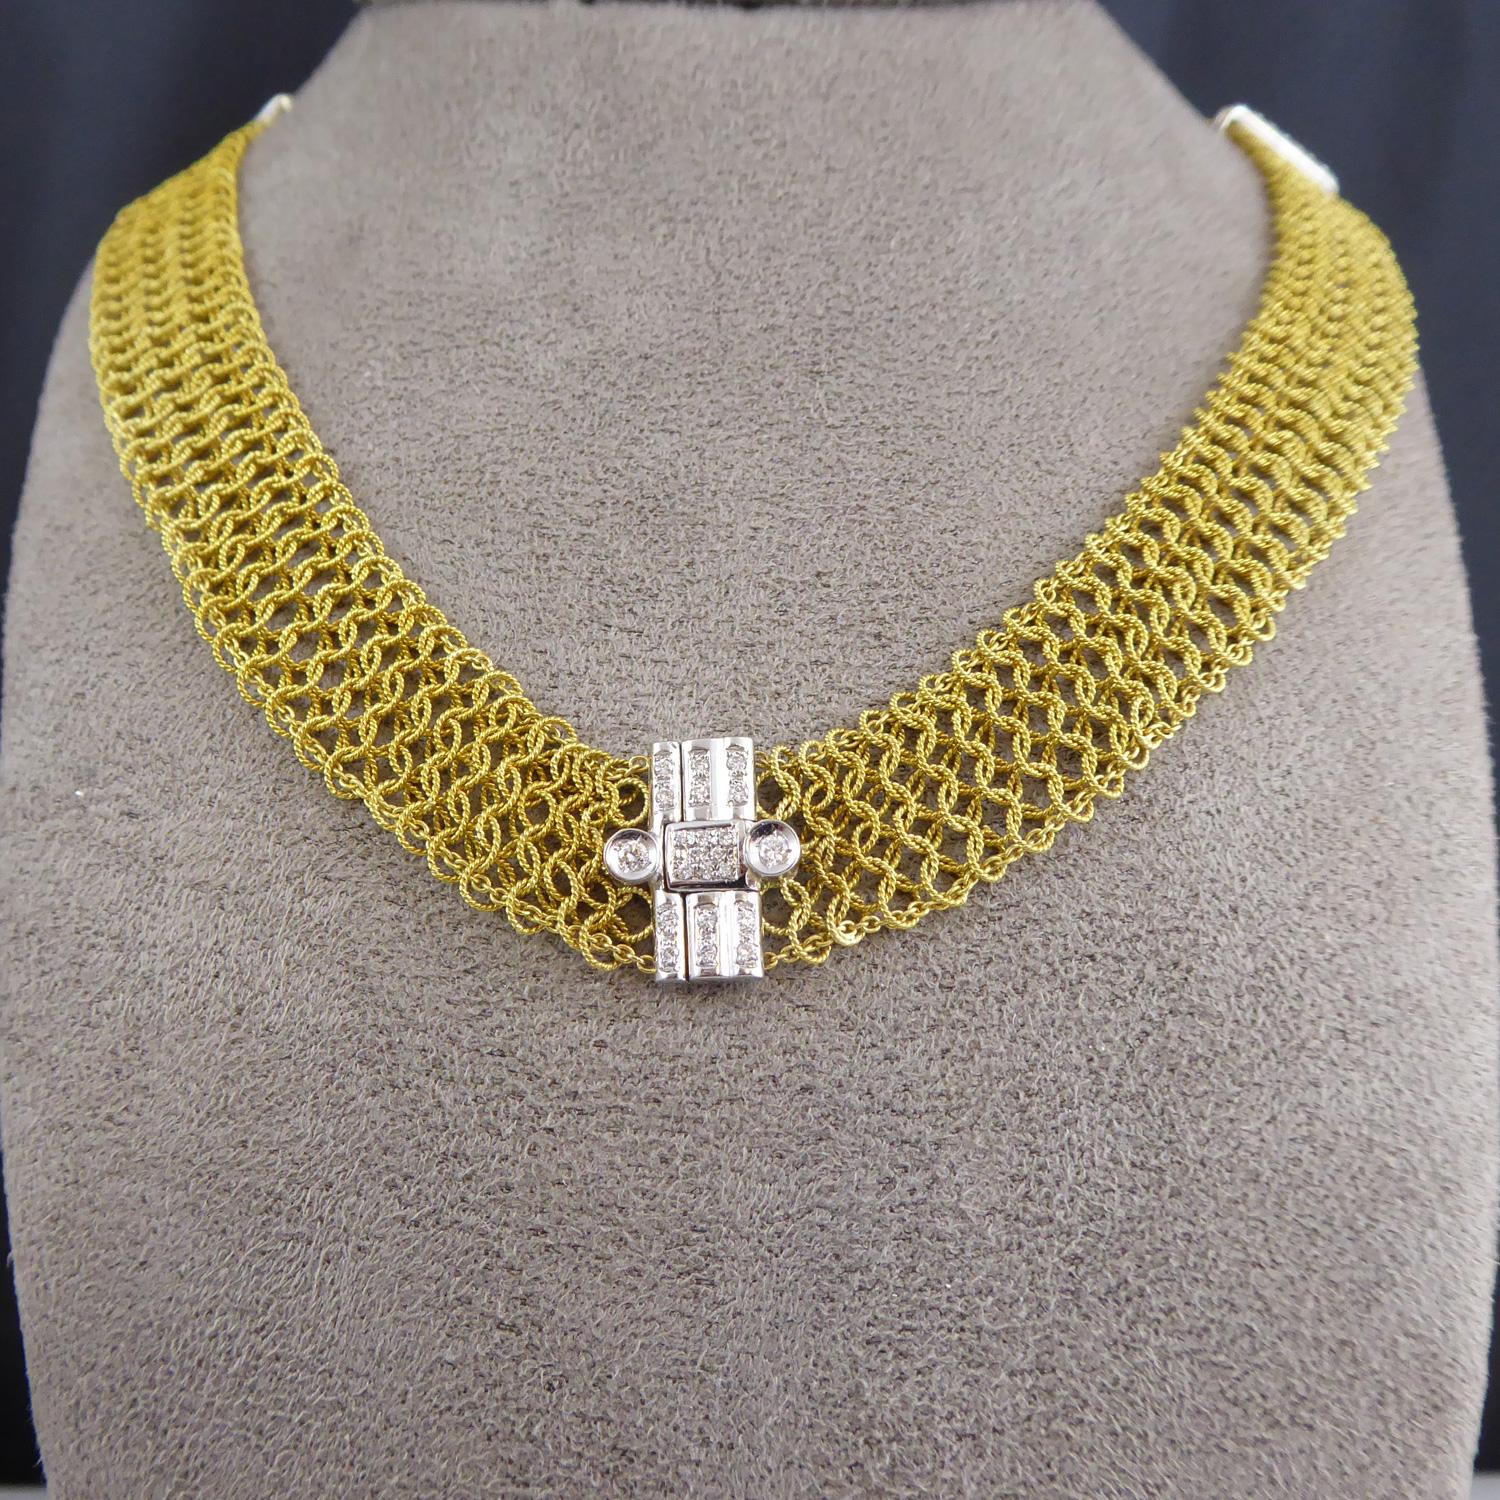 A beautiful vintage gold and and diamond collar style necklace in a contemporary designer style.  The necklace is comprised of small, twisted gold wire circles that have been 